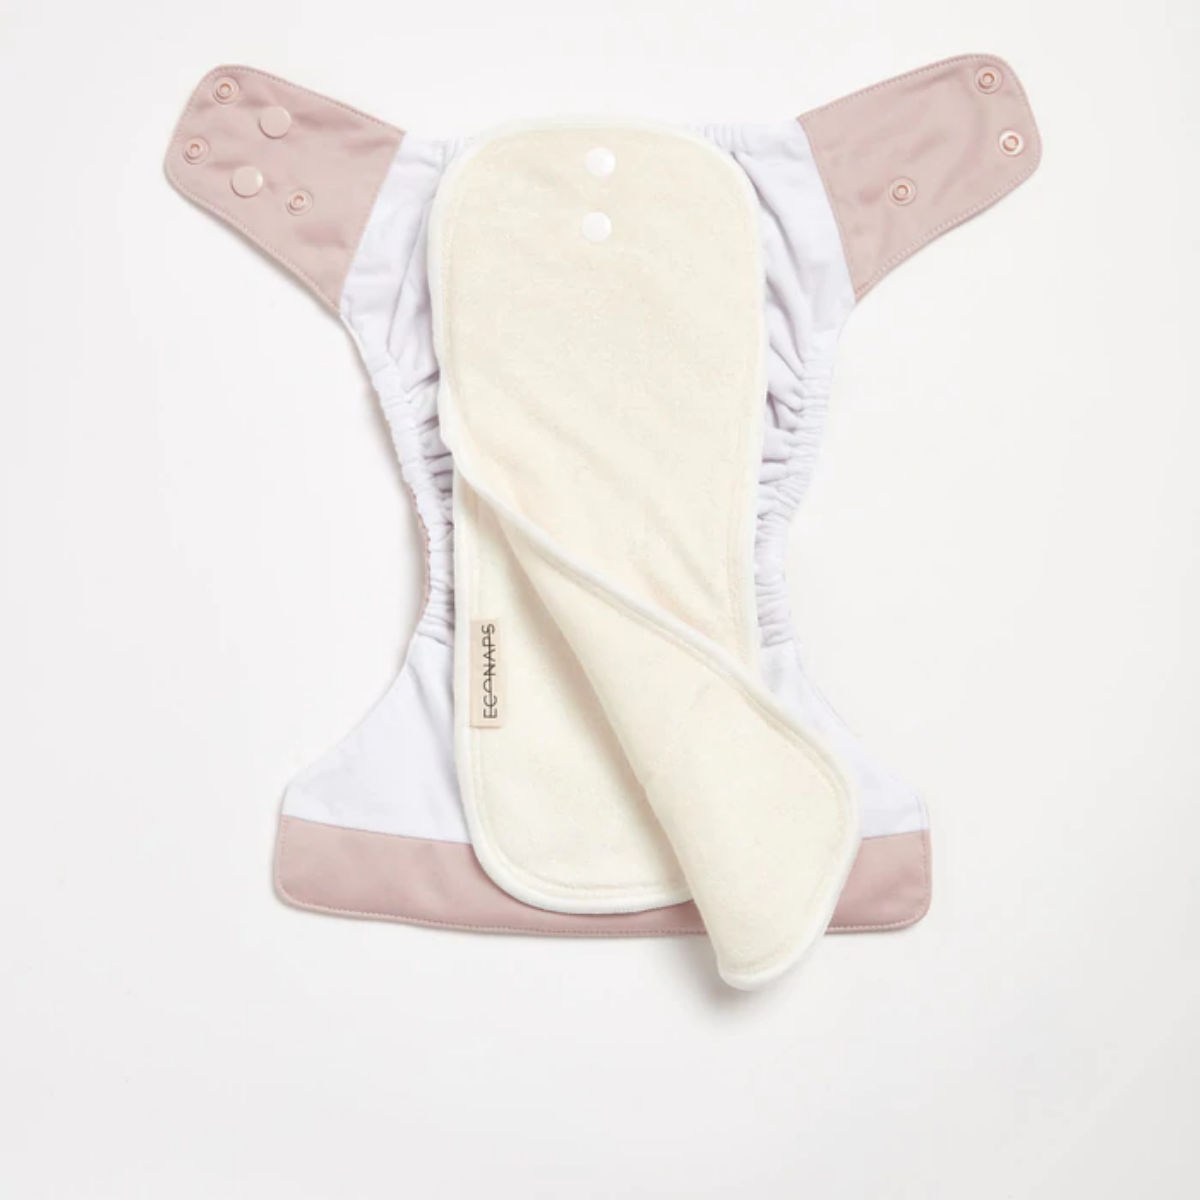 EcoNaps new and improved 2.0 nappy is the first plastic neutral reusable nappy, certified by Plastic Bank. Made from rPET recycled polyester and ultra-absorbent bamboo, EcoNaps are the perfect, easy-to-use cloth nappy solution that is gentle on your baby, and gentle on the planet.